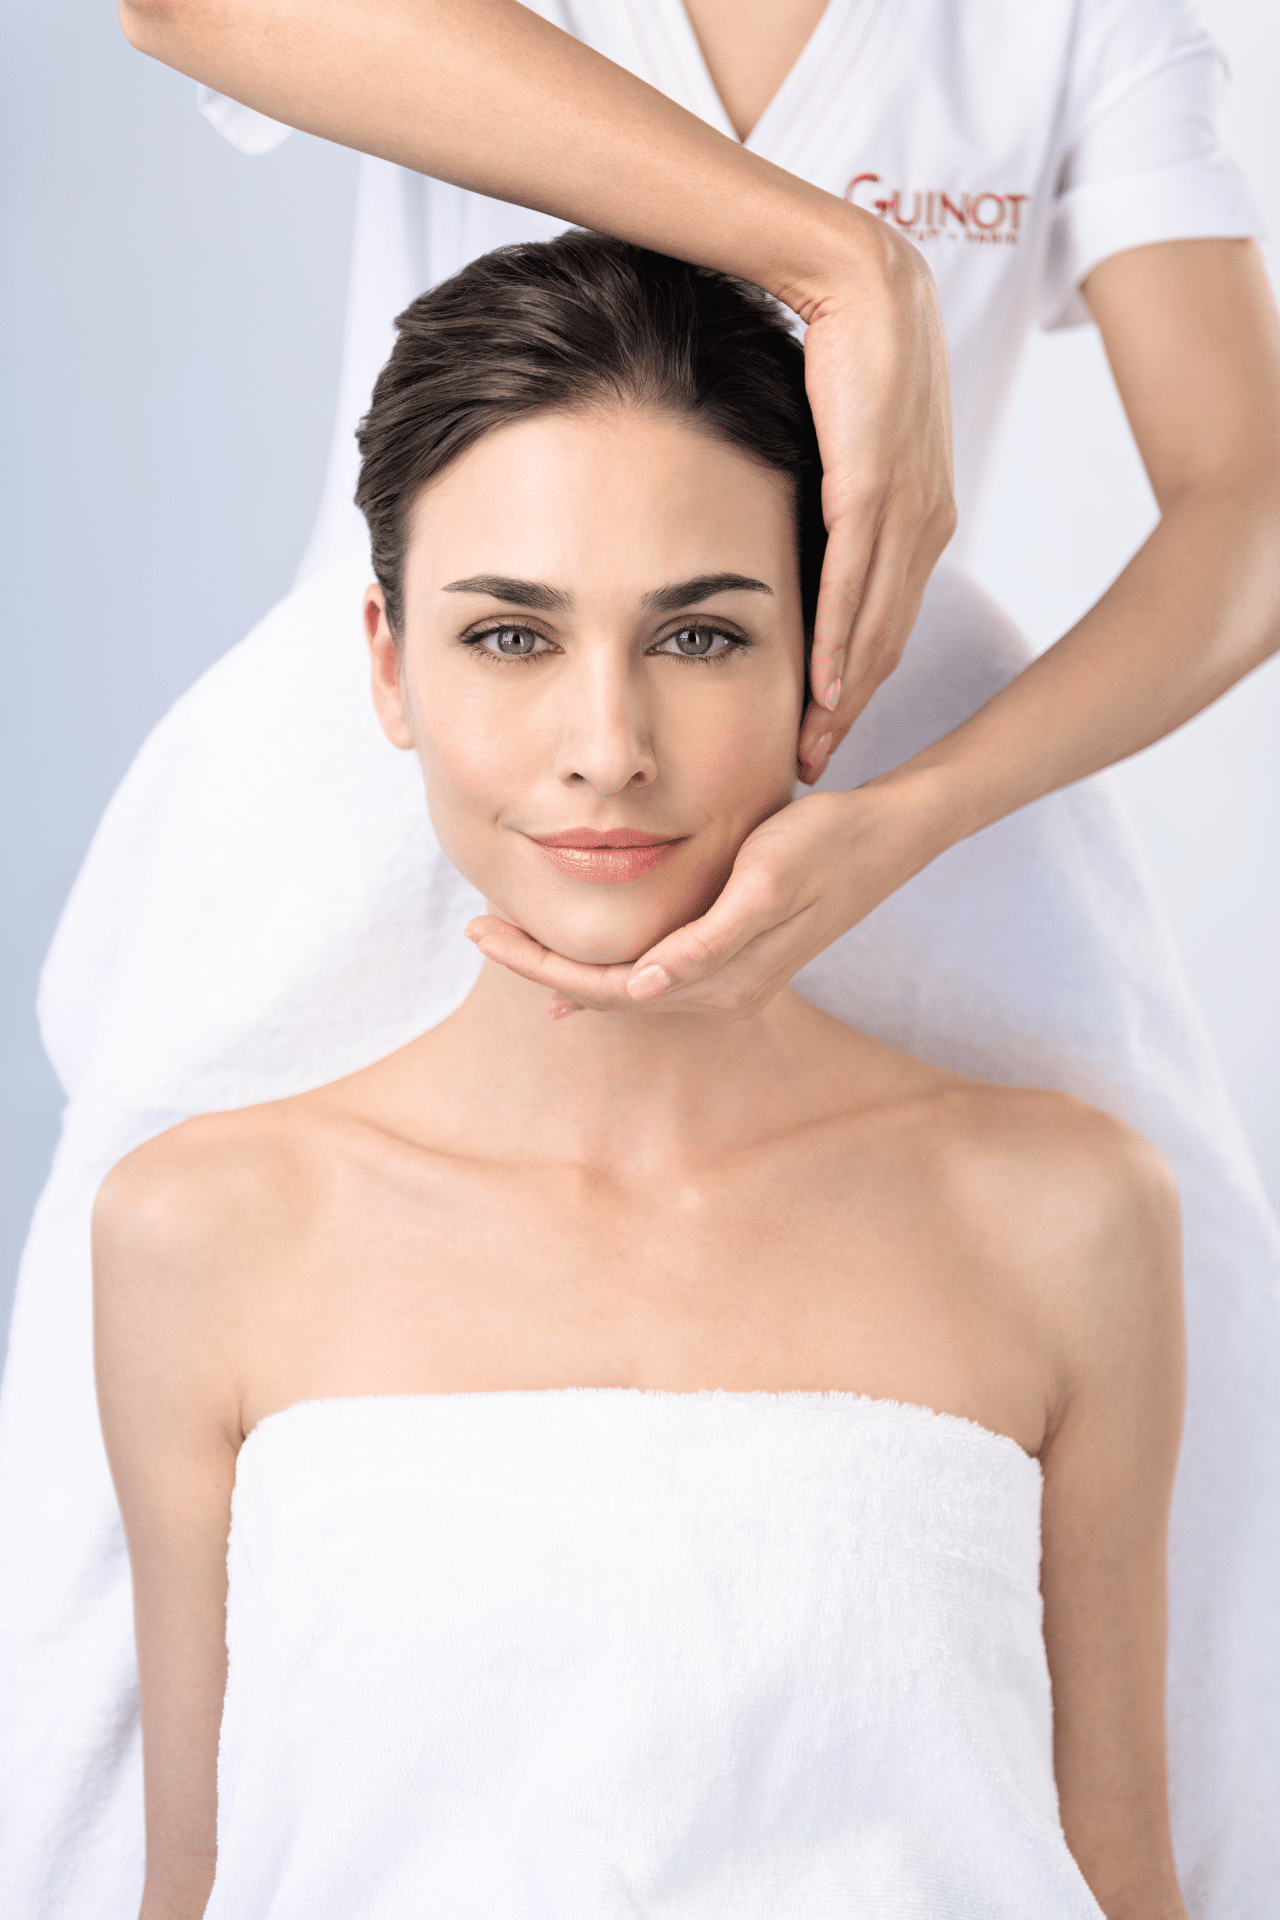 Beauty Therapy, guinot, Beauty Delphine Melbourne, Elthams Skin C